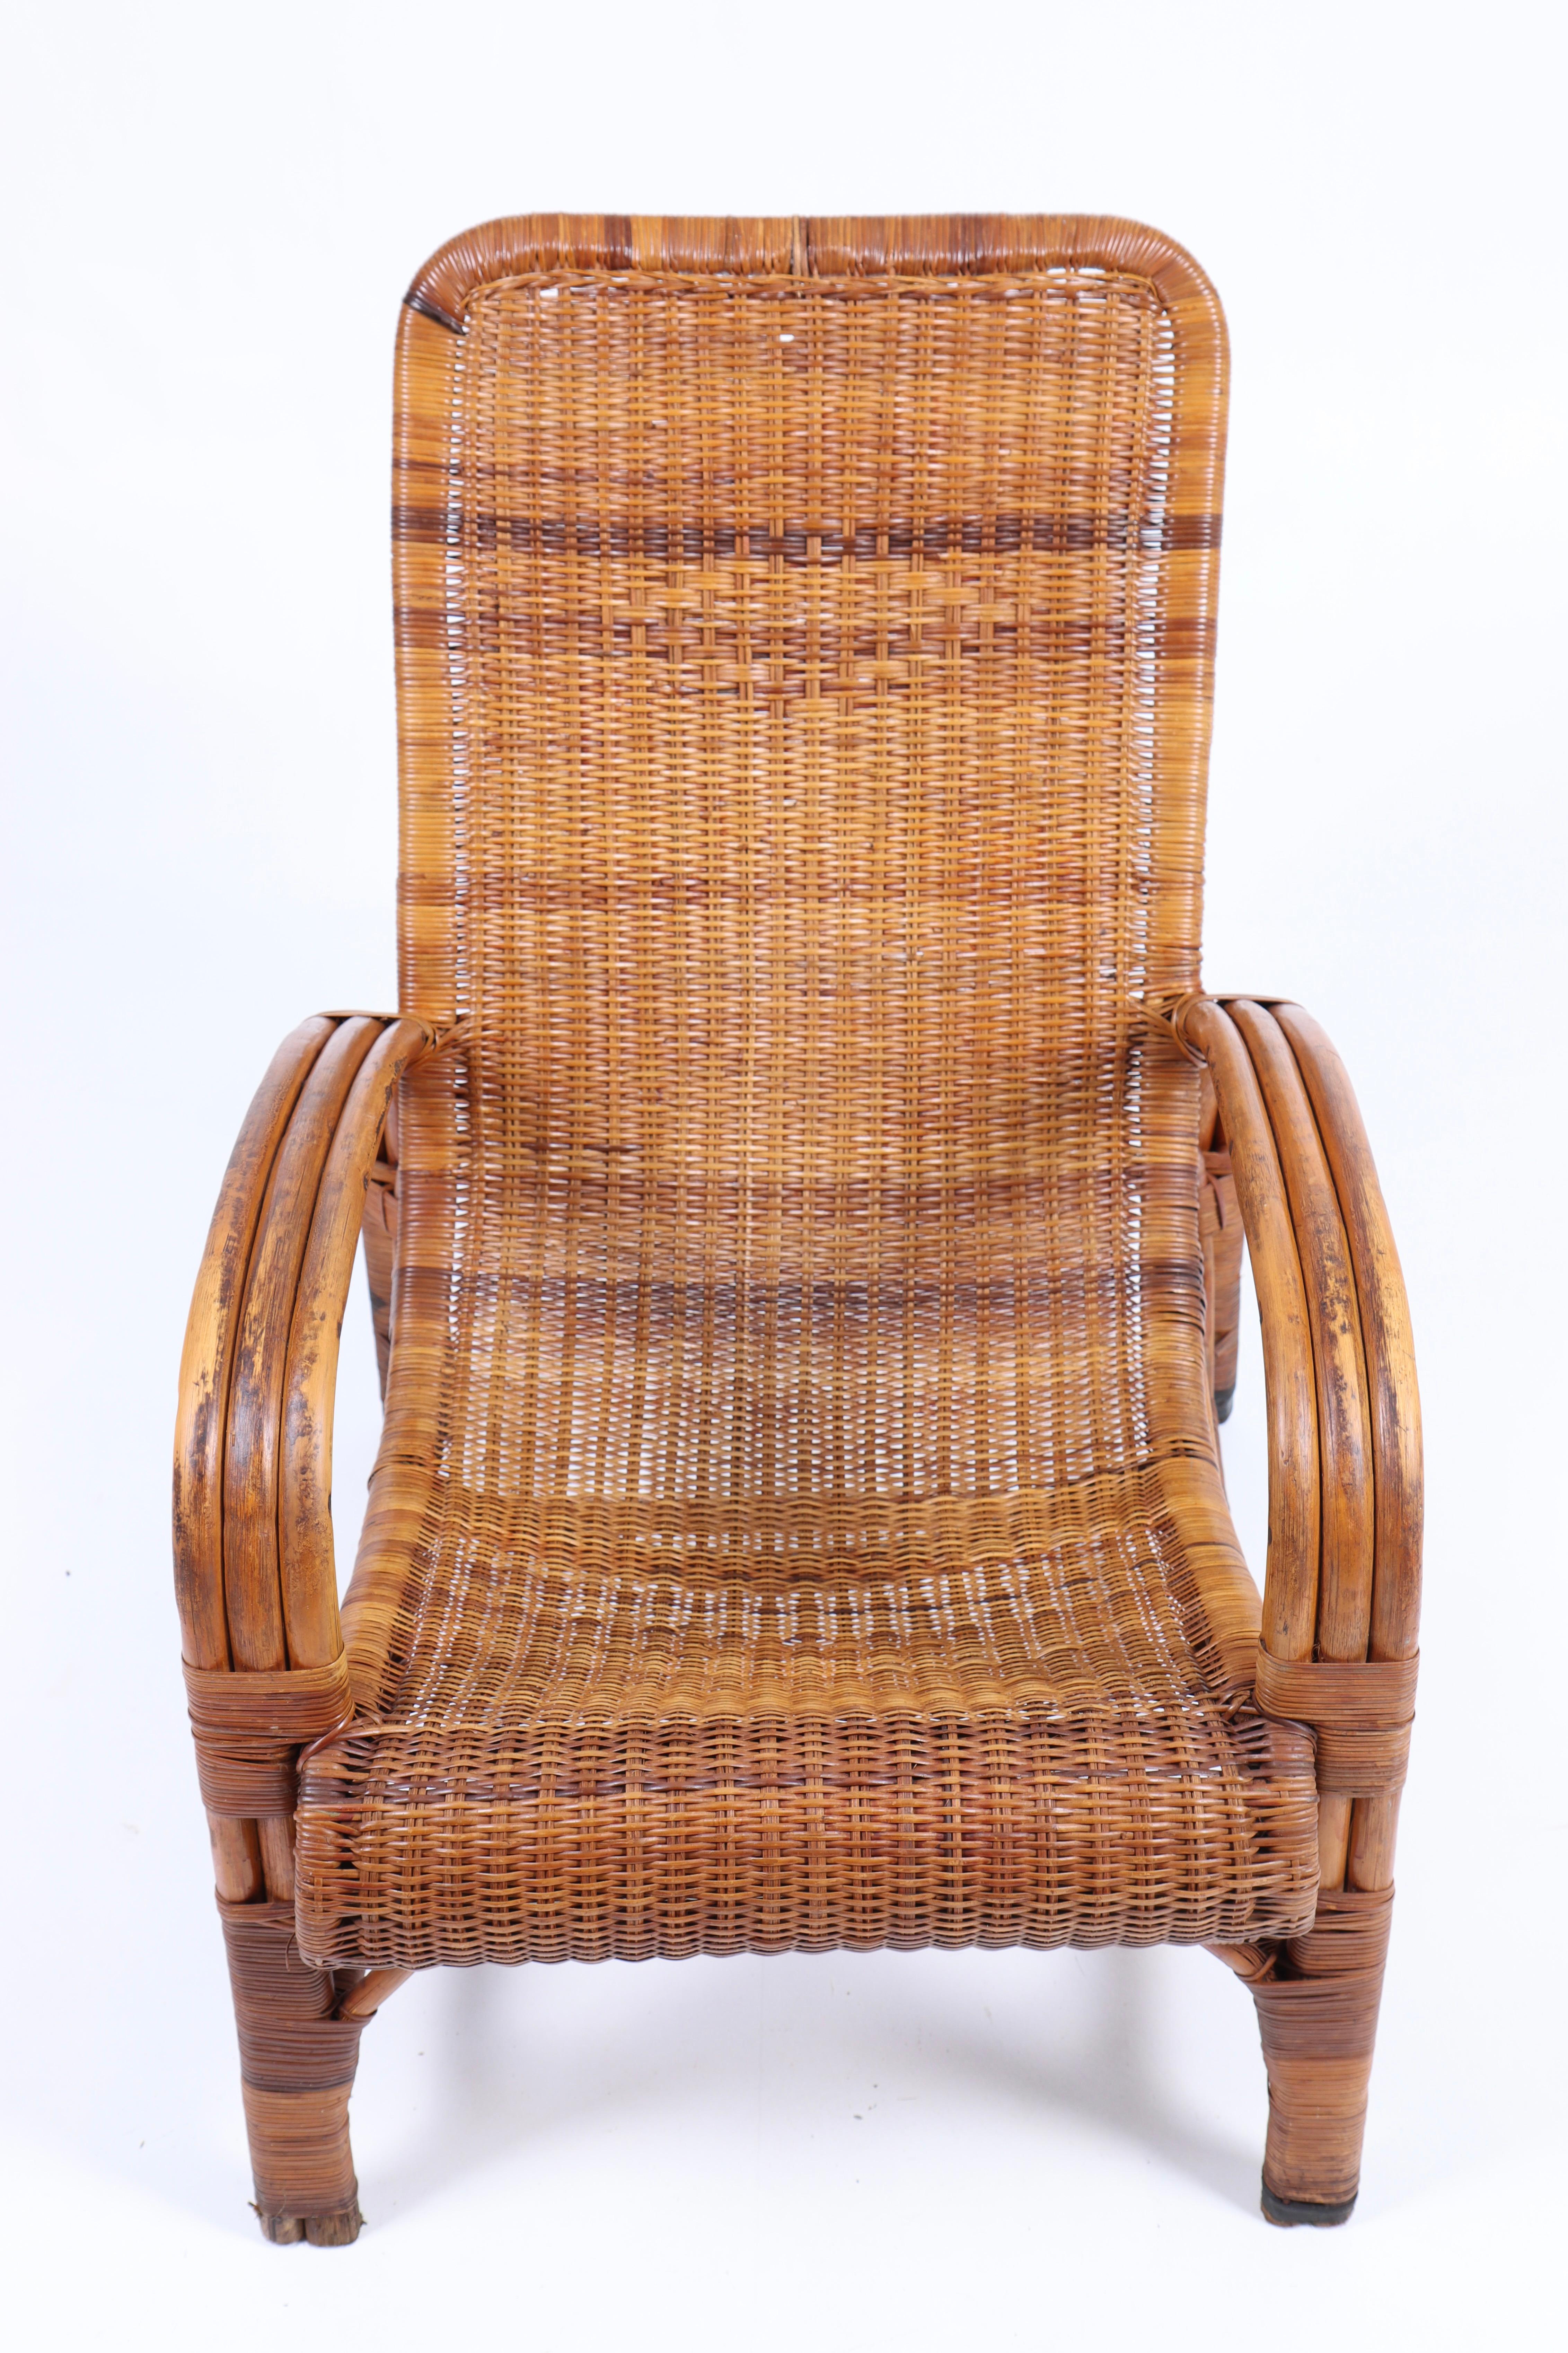 Danish Midcentury Lounge Chair in Bamboo, Made in Denmark, 1950s For Sale